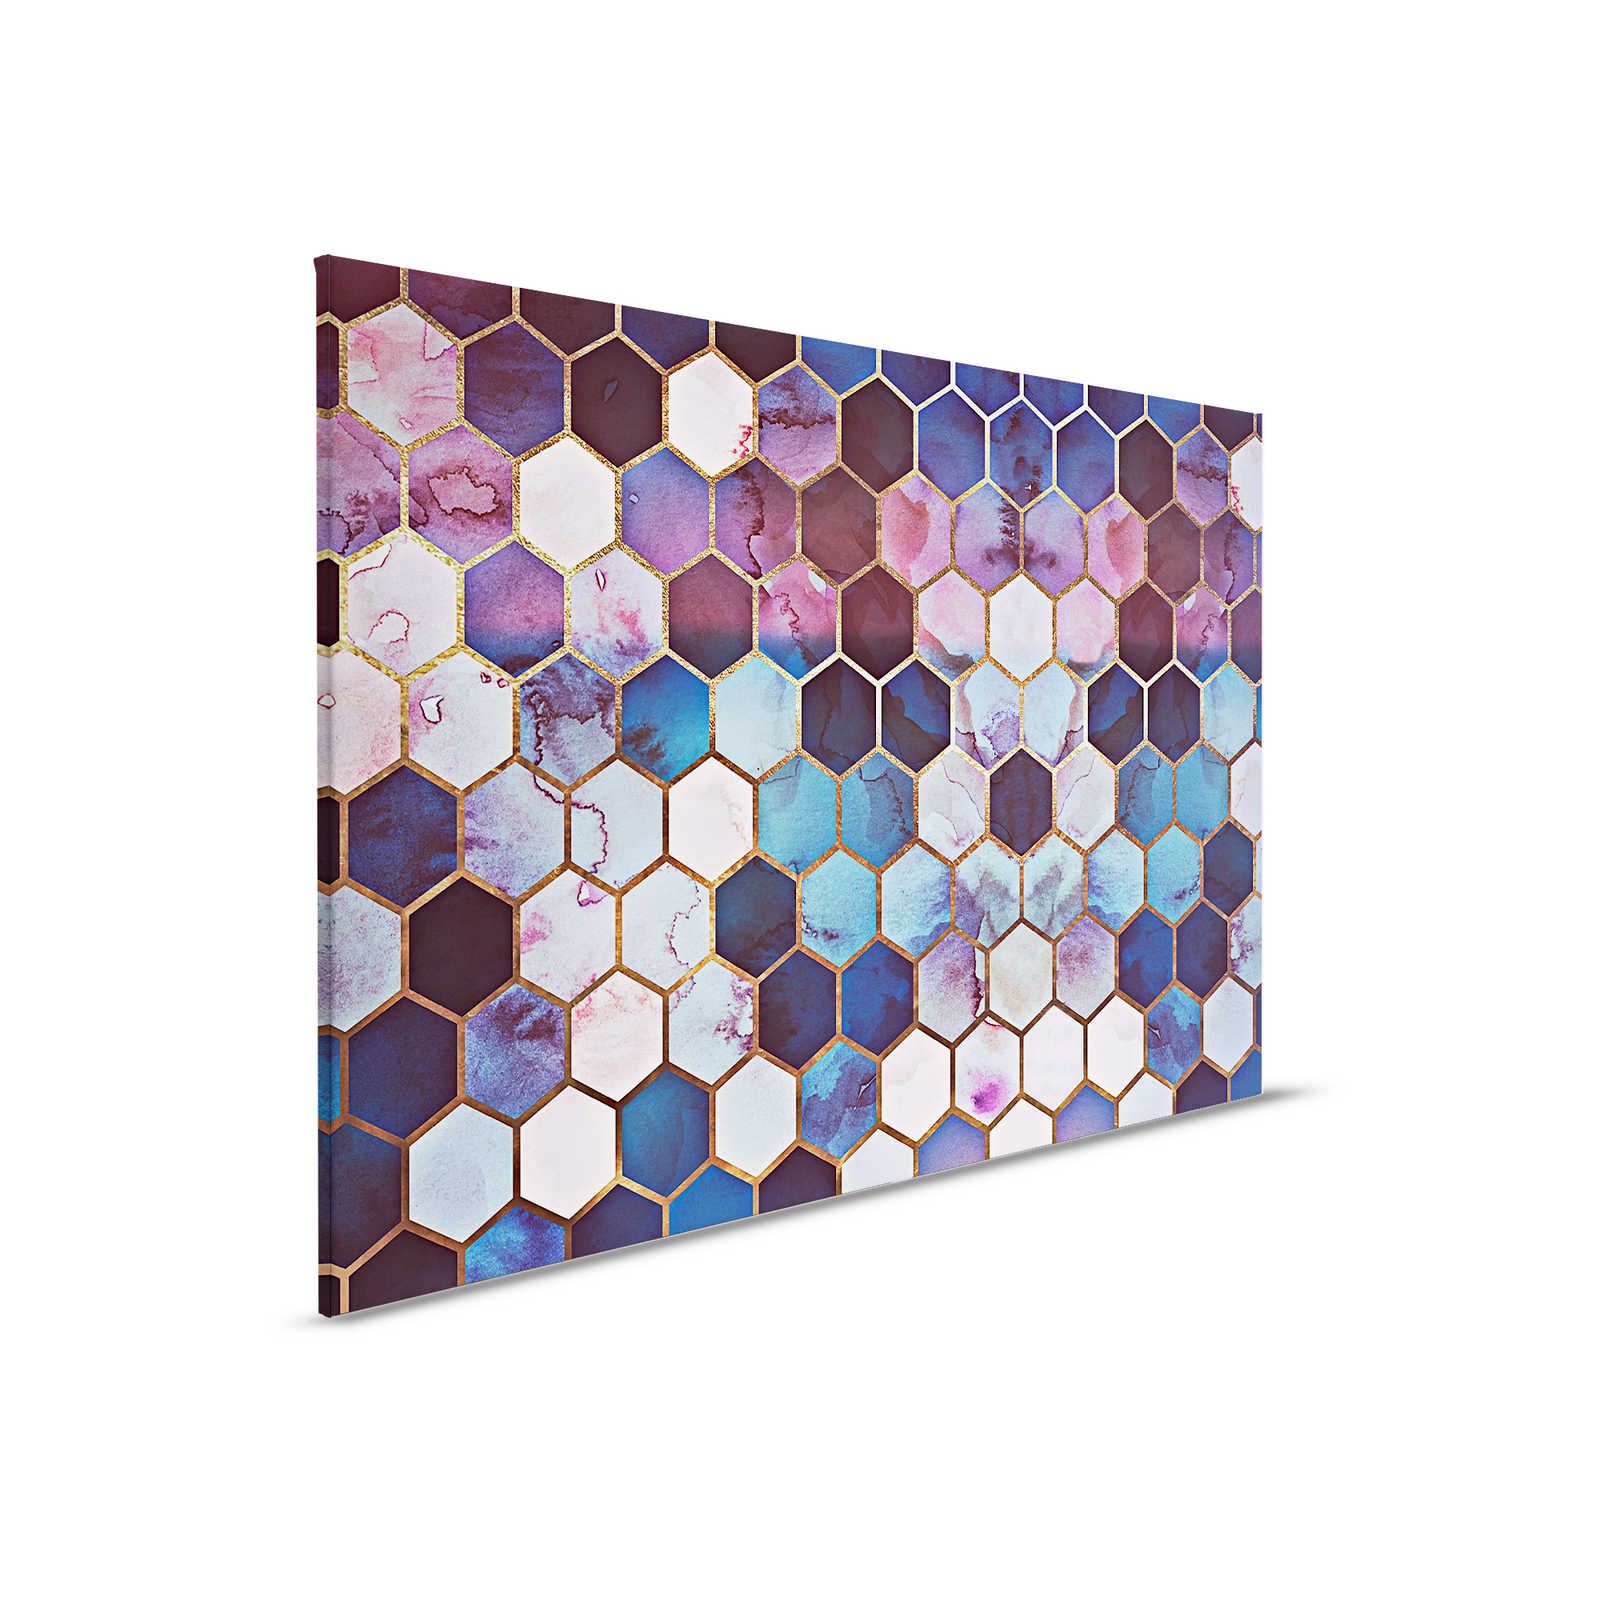         Canvas painting Watercolour Marble with Golden Honeycomb Pattern - 0,90 m x 0,60 m
    